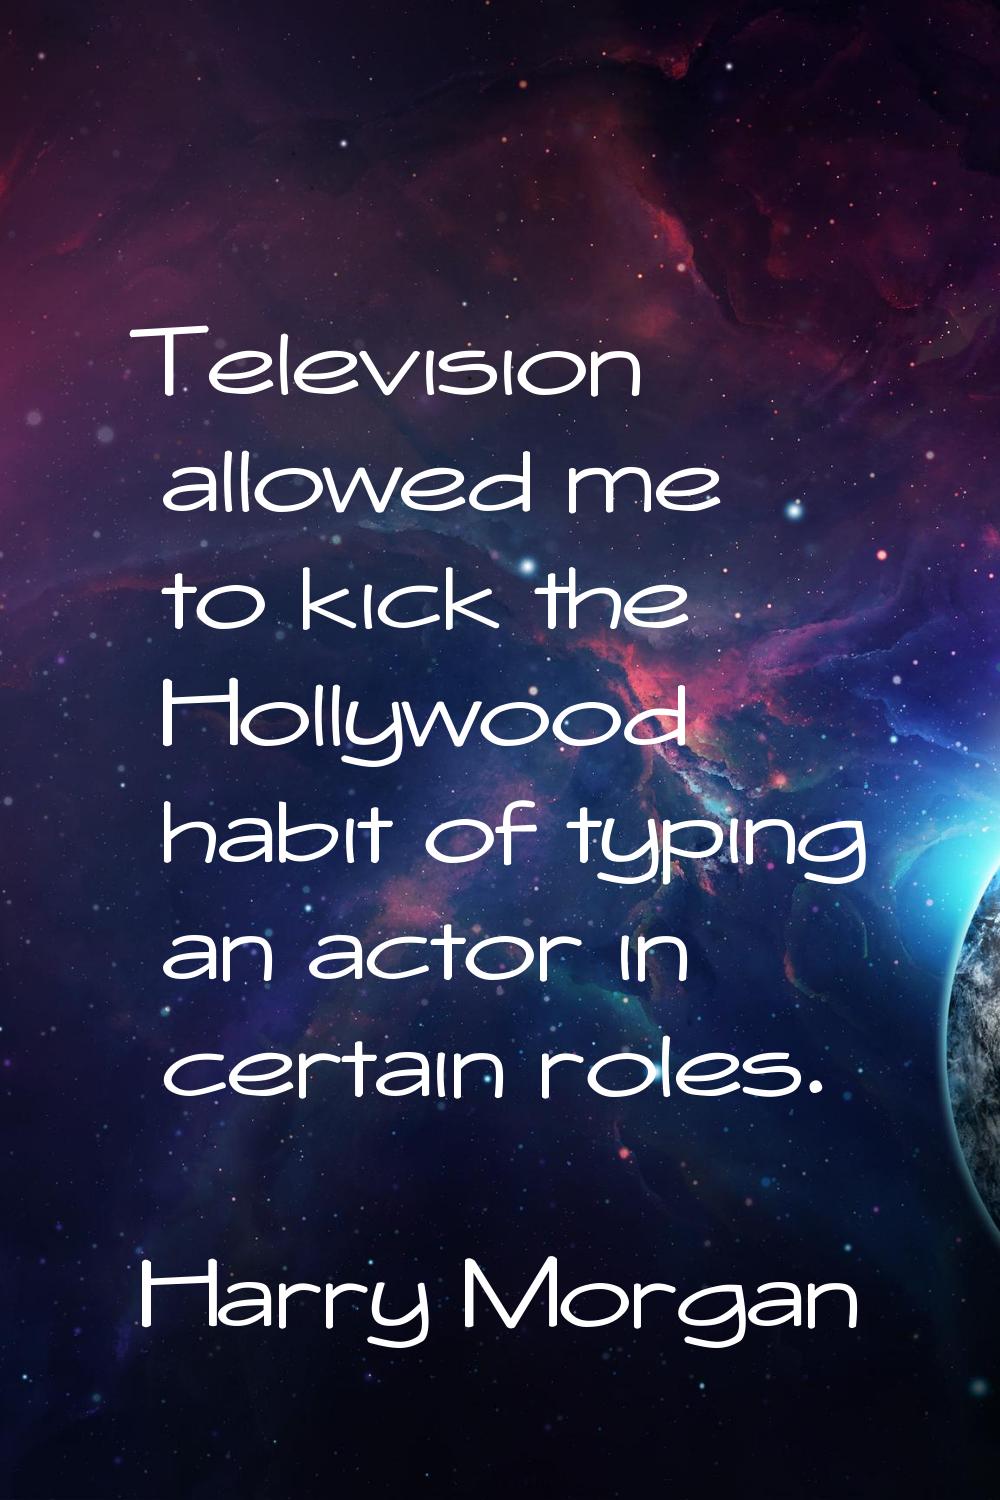 Television allowed me to kick the Hollywood habit of typing an actor in certain roles.